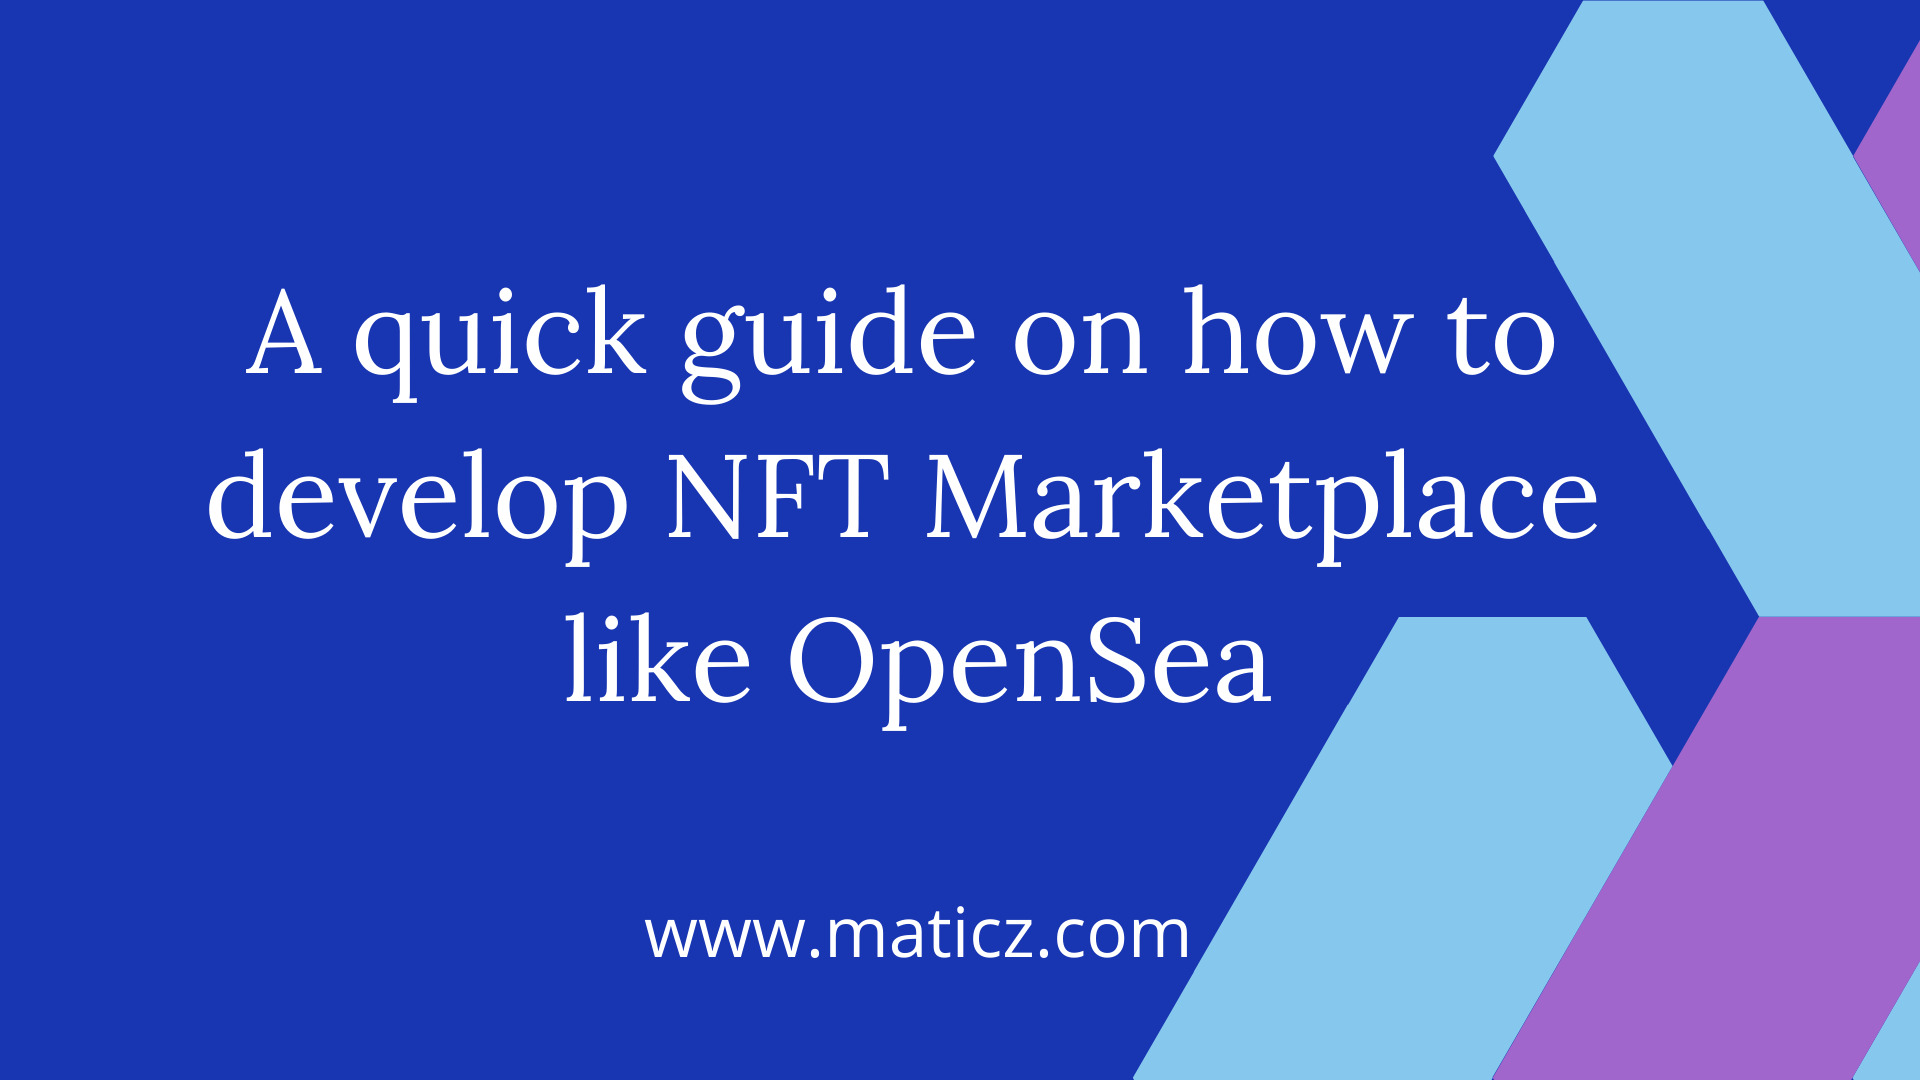 Article about A quick guide on how to develop NFT Marketplace like OpenSea